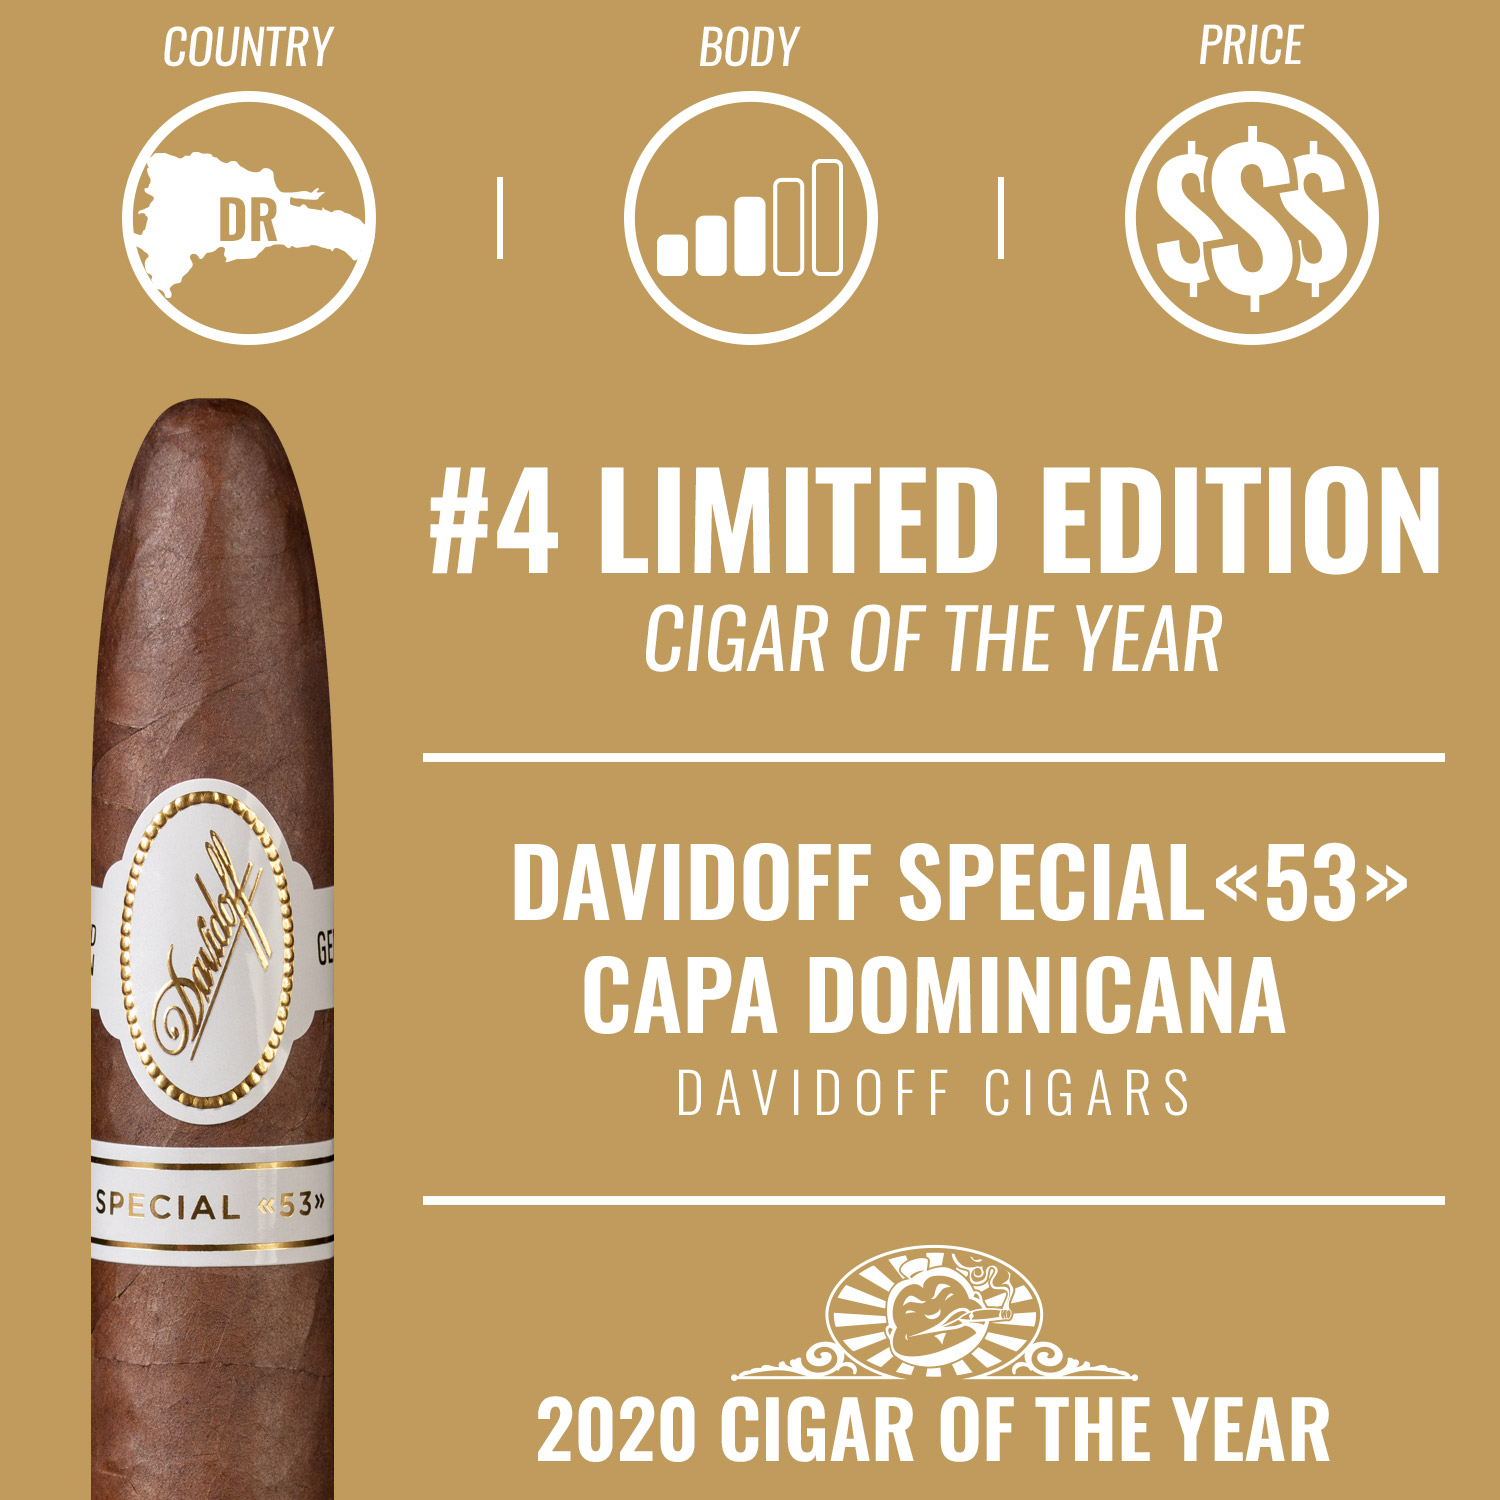 Davidoff Special 53 Capa Dominicana No. 4 Limited Edition Cigar of the Year 2020